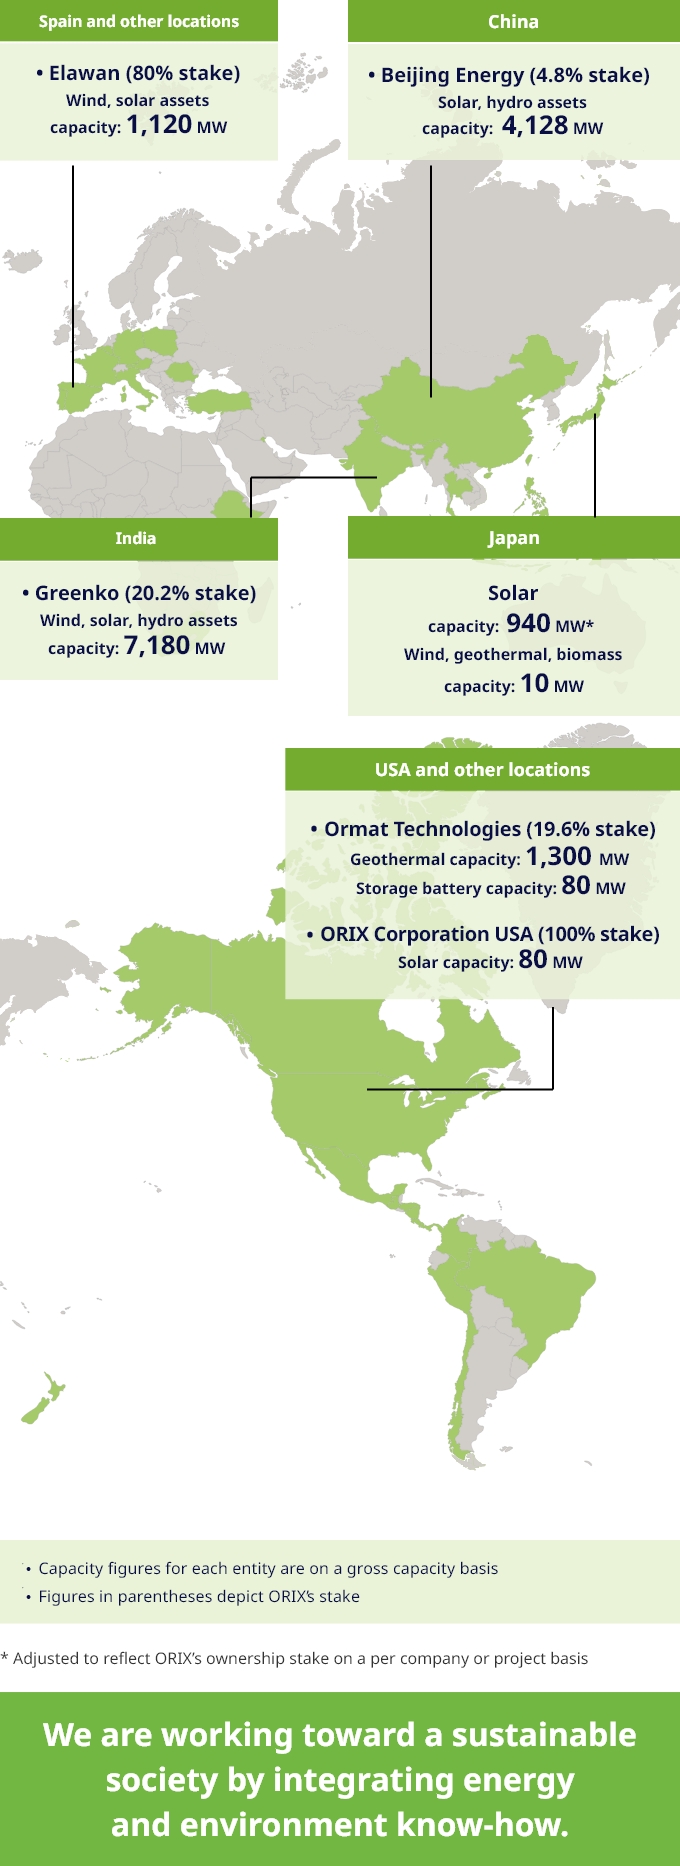 Global Expansion of the Renewable Energy Business